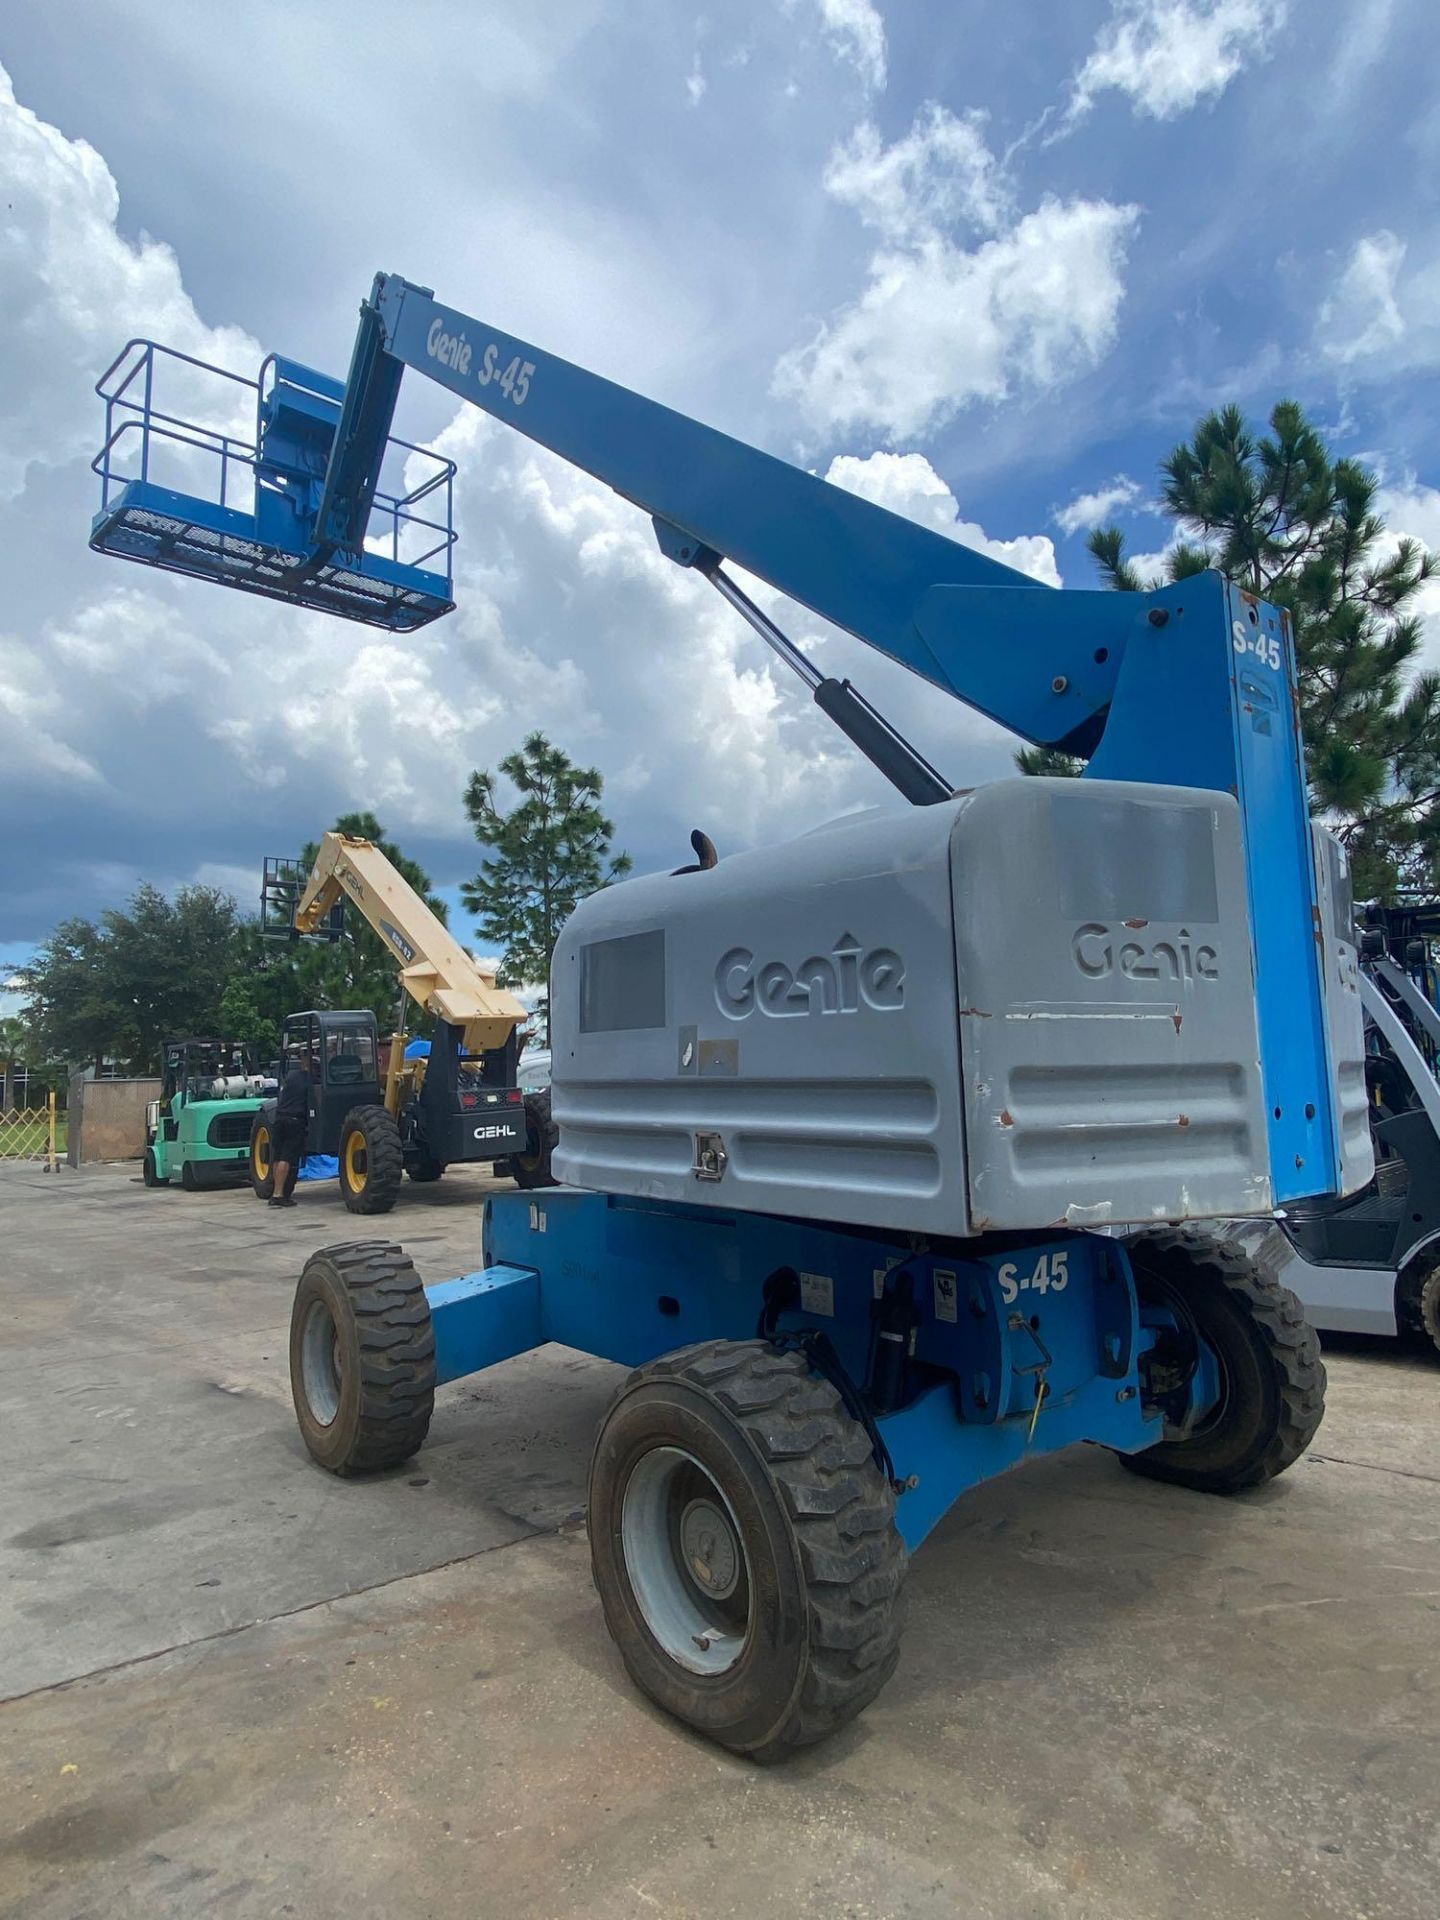 GENIE S-45 ARTICULATING DIESEL BOOM LIFT, 4x4, 45' PLATFORM HEIGHT, RUNS AND OPERATES - Image 11 of 12